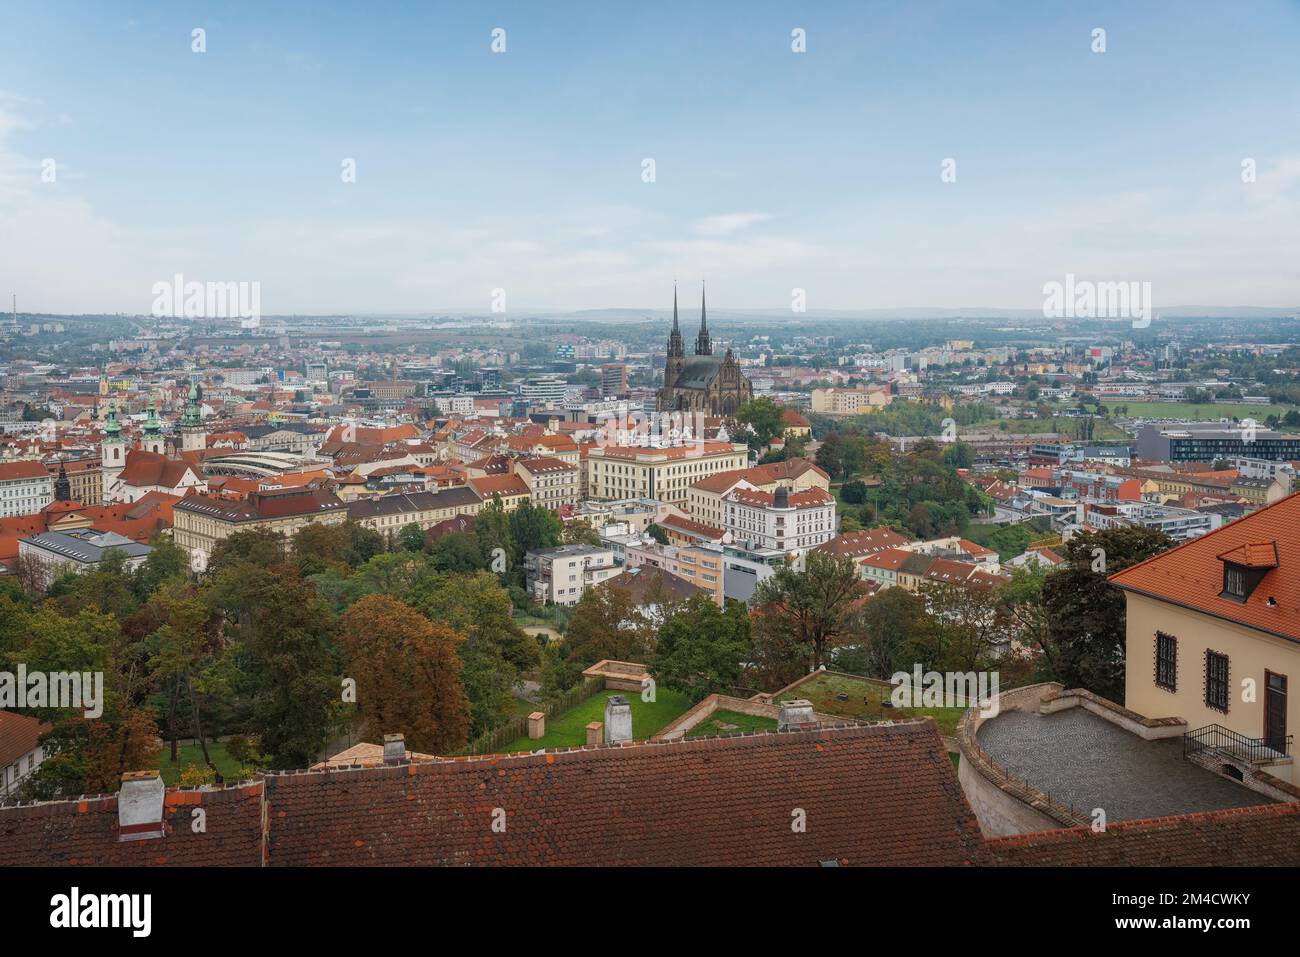 Aerial view of Brno with Cathedral of St. Peter and Paul - Brno, Czech Republic Stock Photo